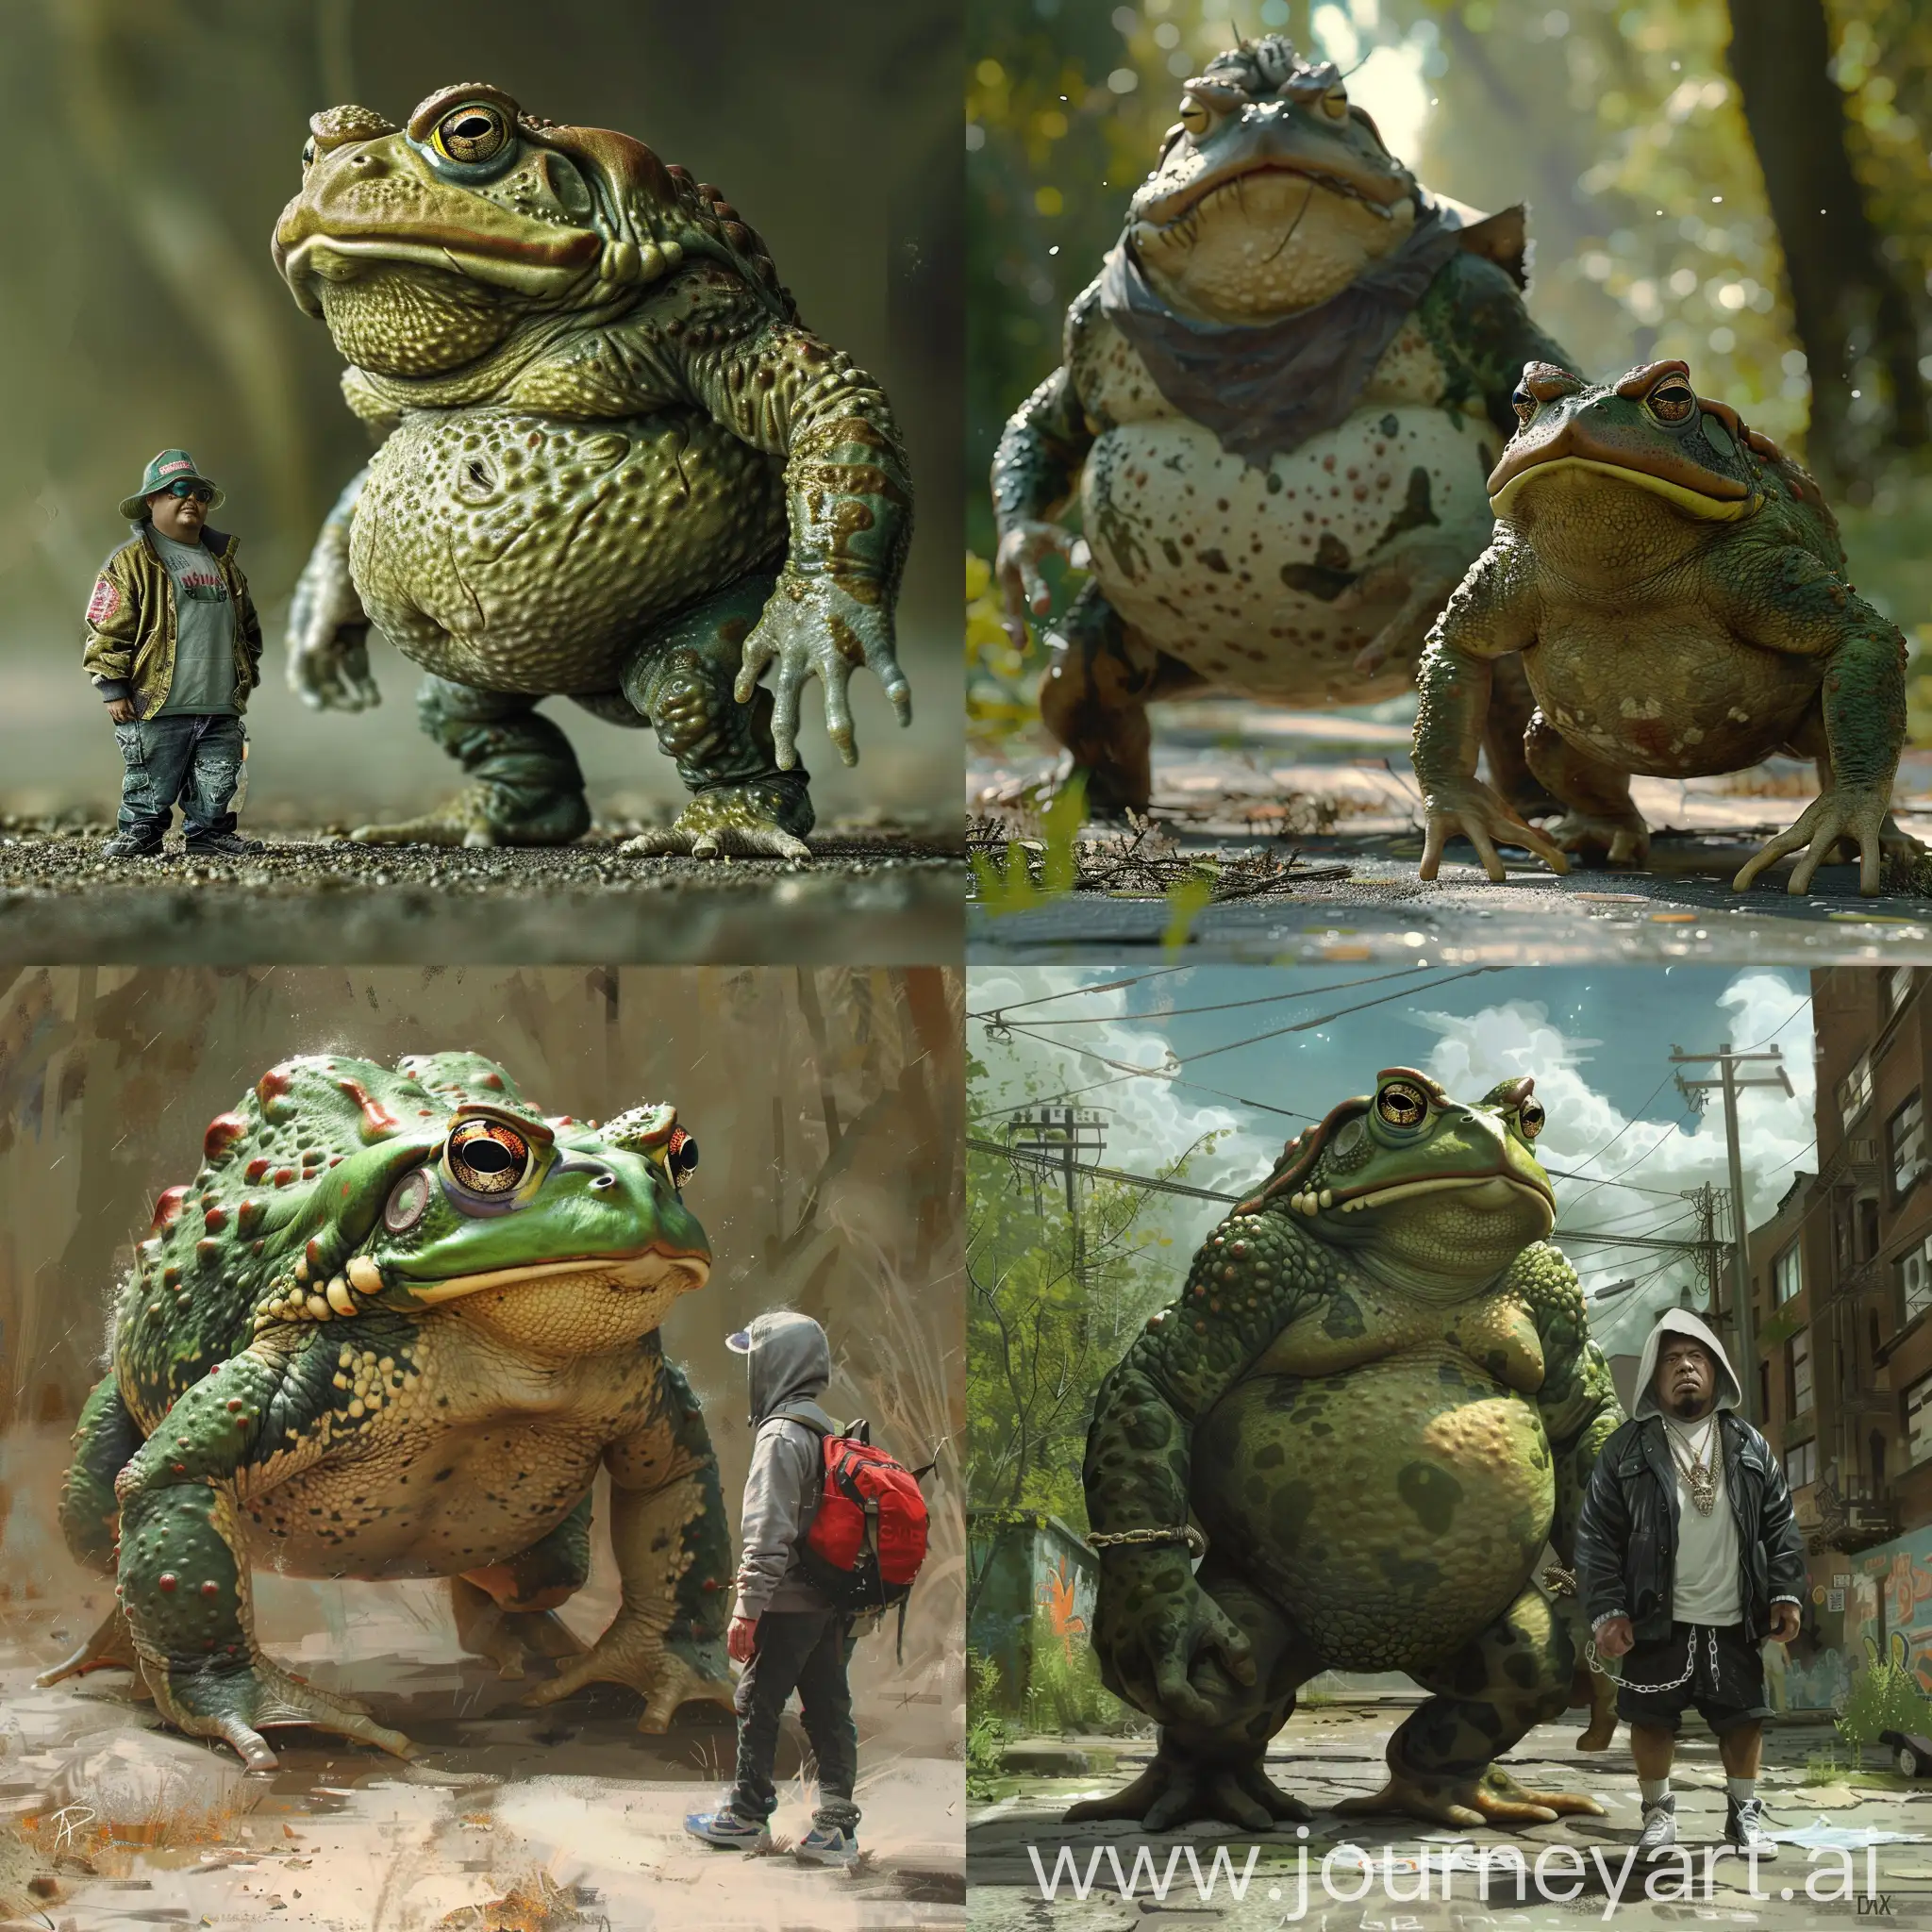 big green toad walking with his friend named Max that looks like Eminem